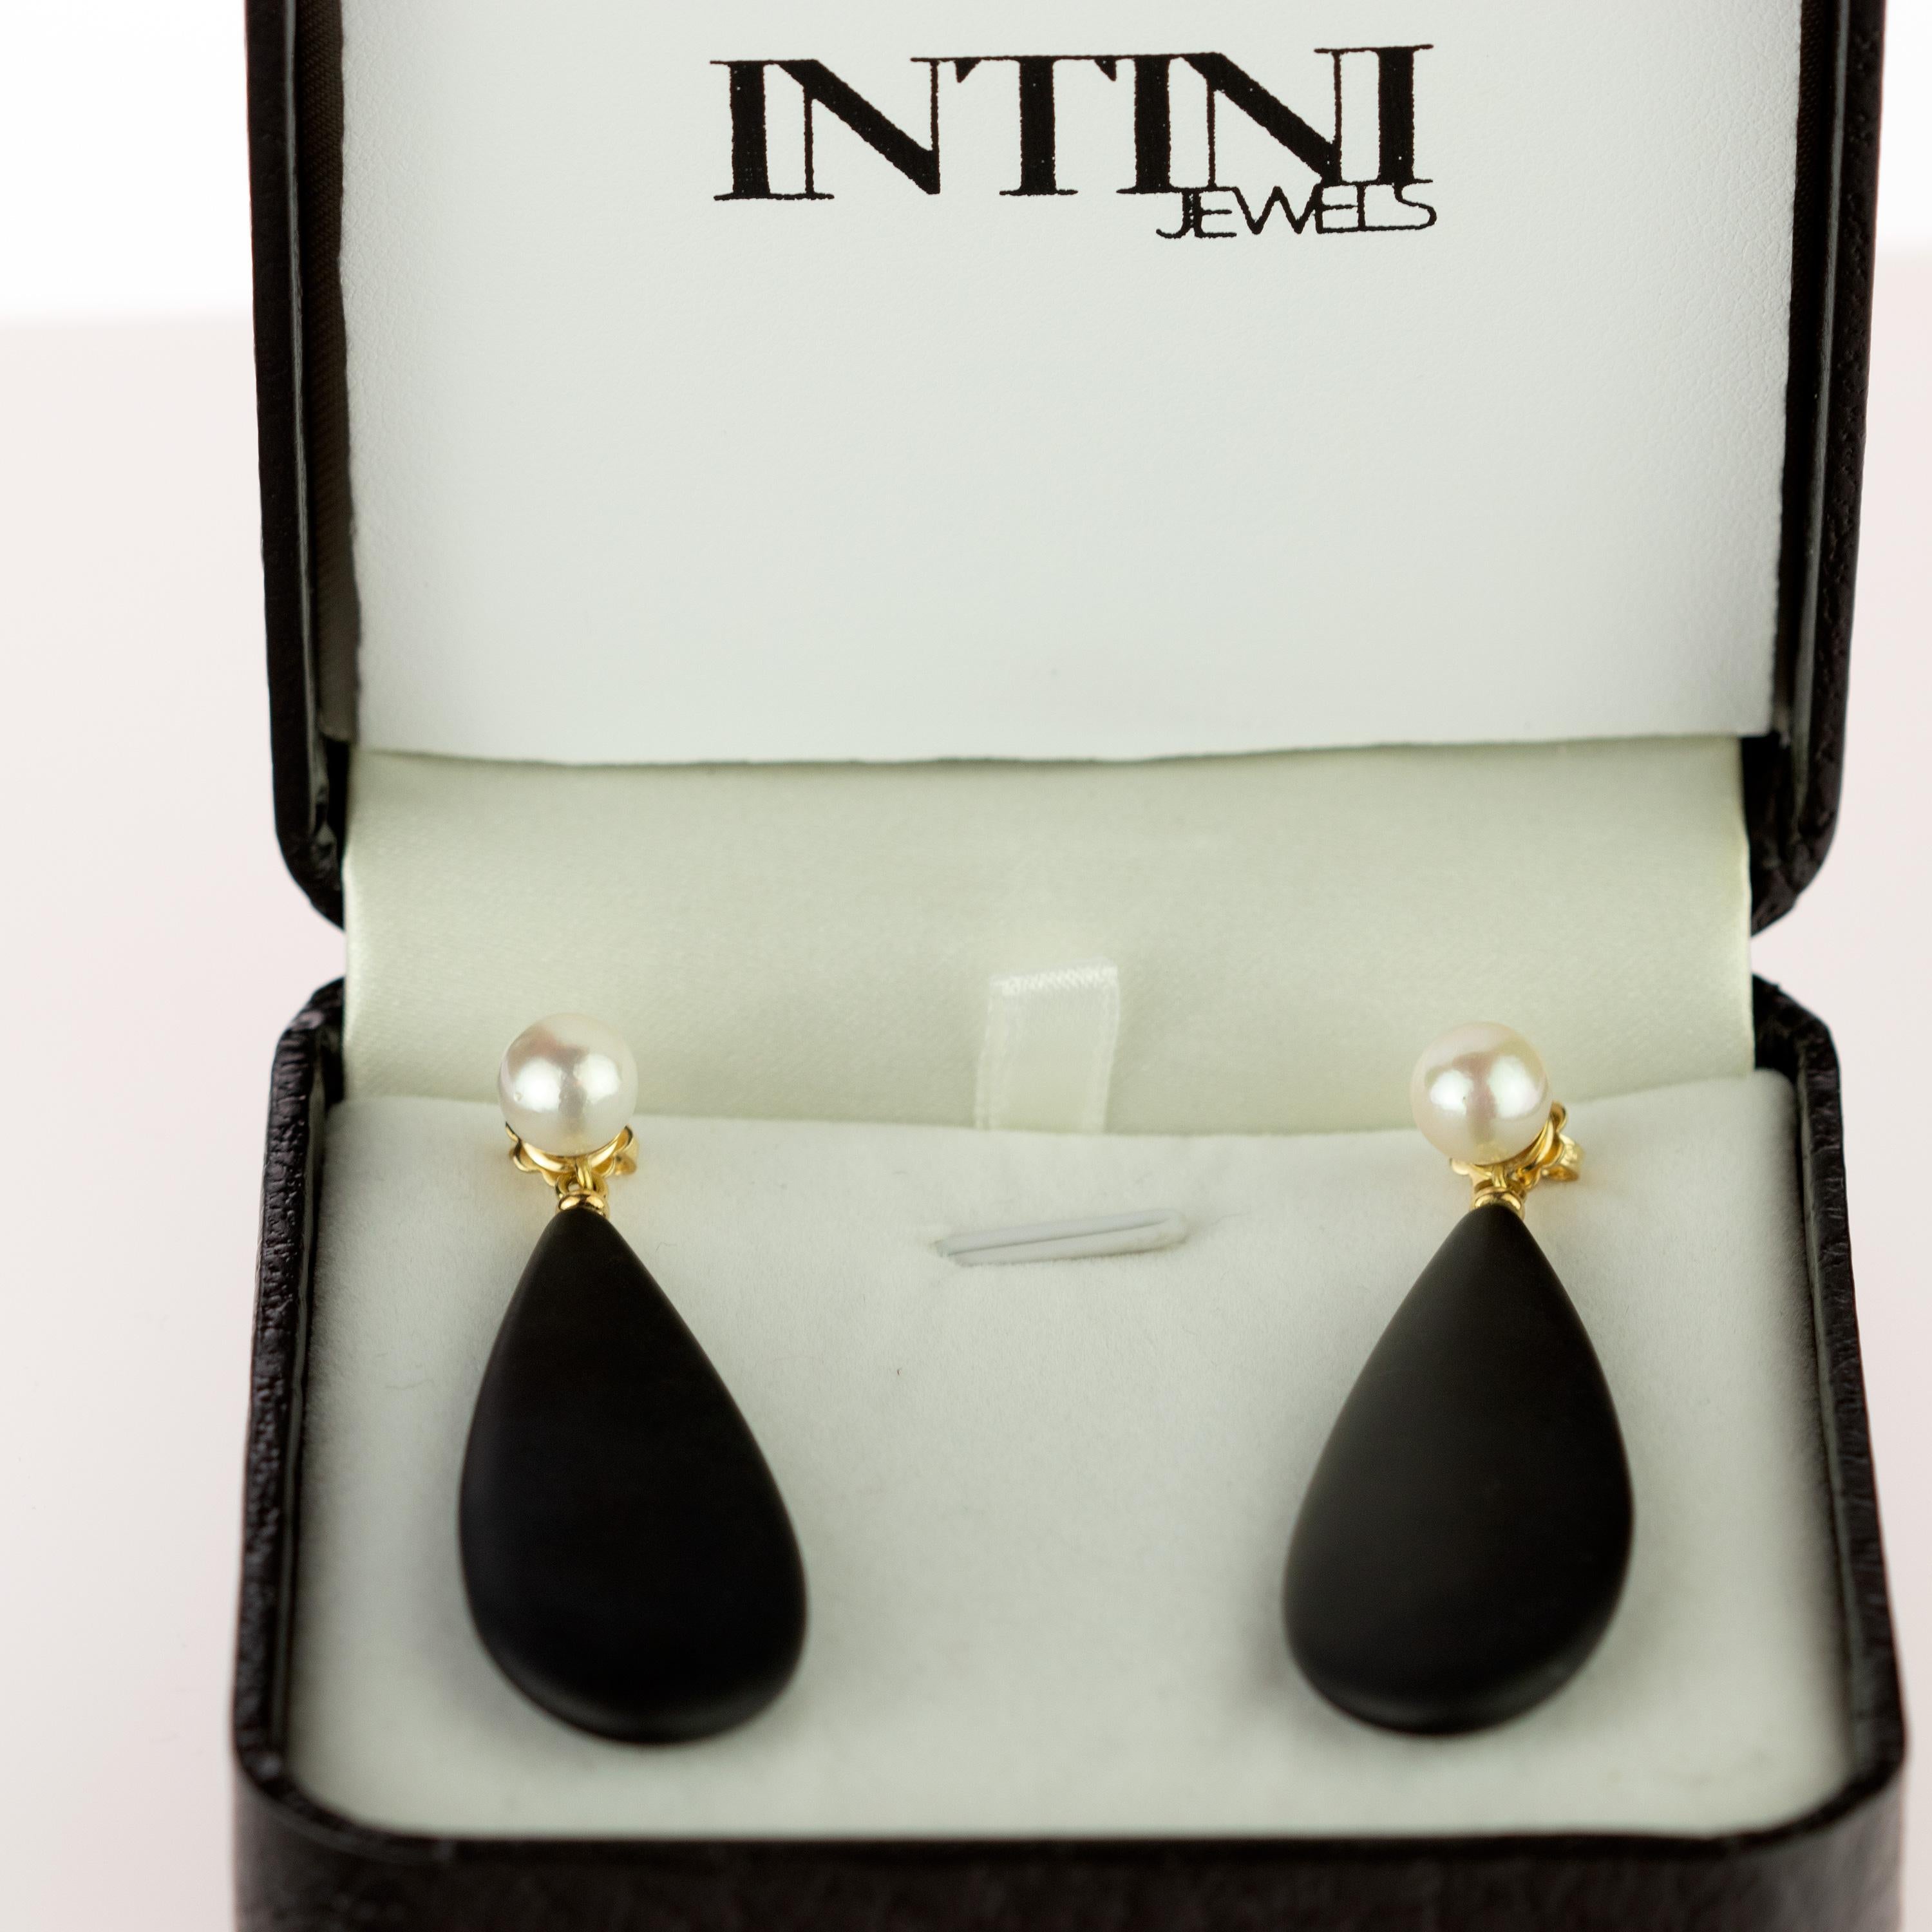 Intini Jewels 18 Karat Gold Flat Pear Black Agate Crafted Drop Vintage Earrings For Sale 2